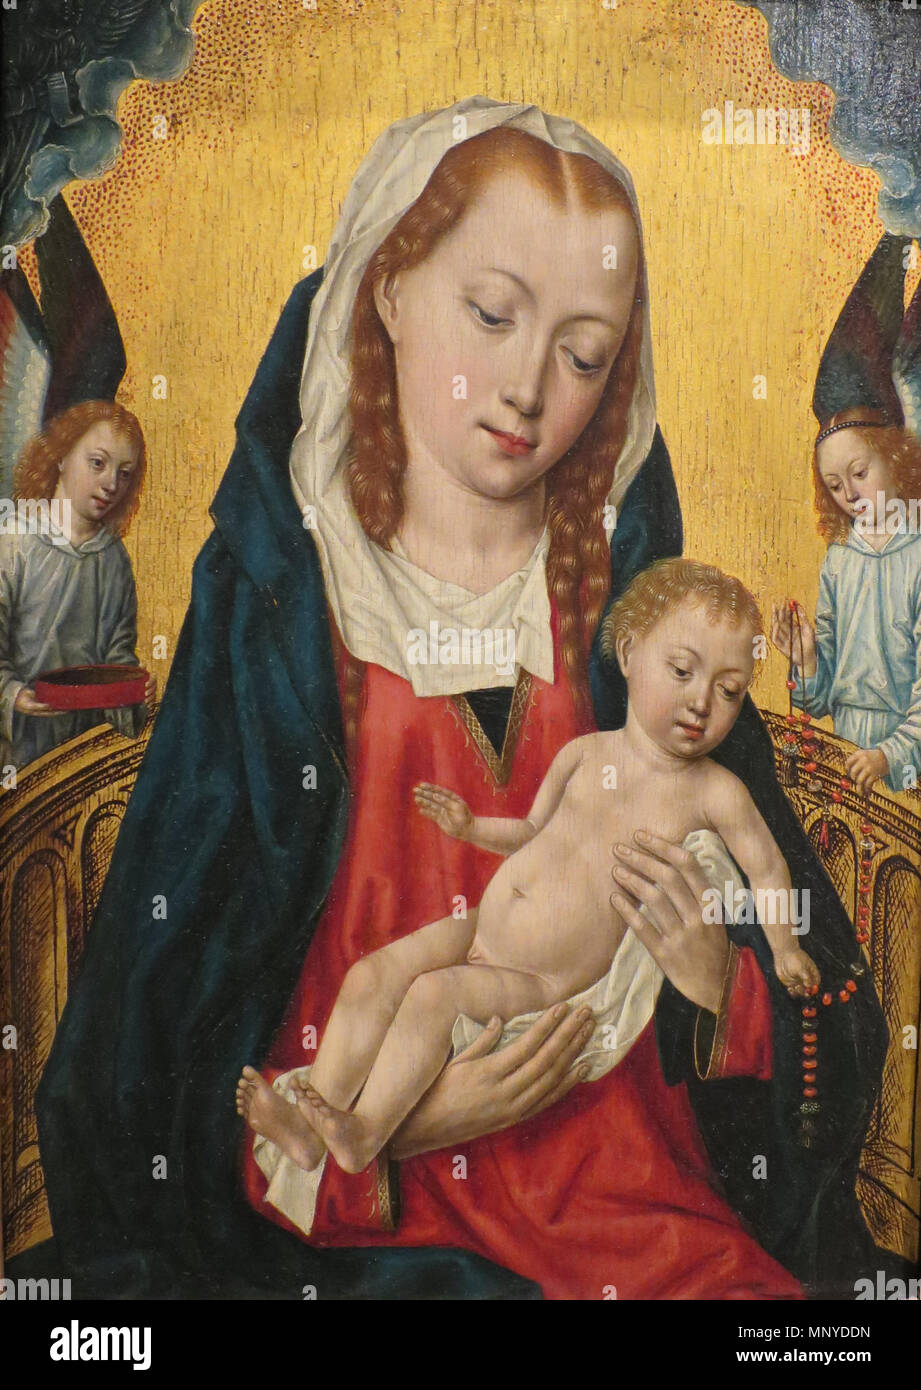 . Master of the Saint Ursula Legend (died  ) Virgin and Child with Two Angels, circa 1485 Painting, oil and tempera on panel, 13 5/16 x 9 1/2 in. (33.7 x 24.1 cm); framed: 16 3/4 x 13 x 2 in. (42.55 x 33.02 x 5.08 cm); sight: 12 5/8 x 8 7/8 in. (32.07 x 22.54 cm) Mr. and Mrs. Allan C. Balch Collection (M.44.2.6) . circa 1485. Master of the Saint Ursula Legend 1271 WLA lacma Virgin and Child with Two Angels Stock Photo